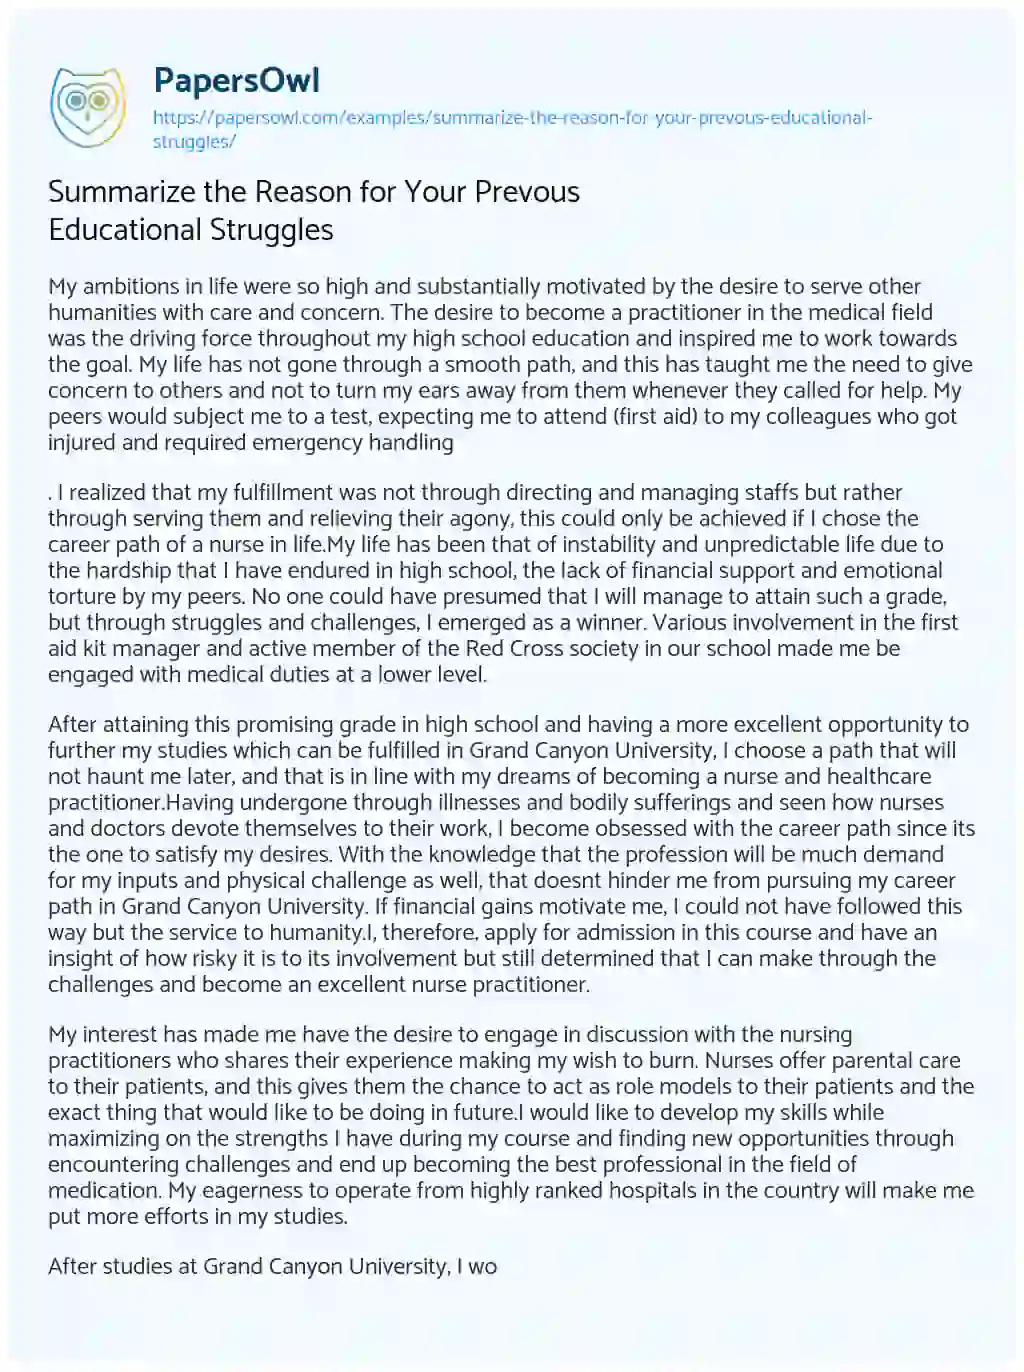 Essay on Summarize the Reason for your Prevous Educational Struggles